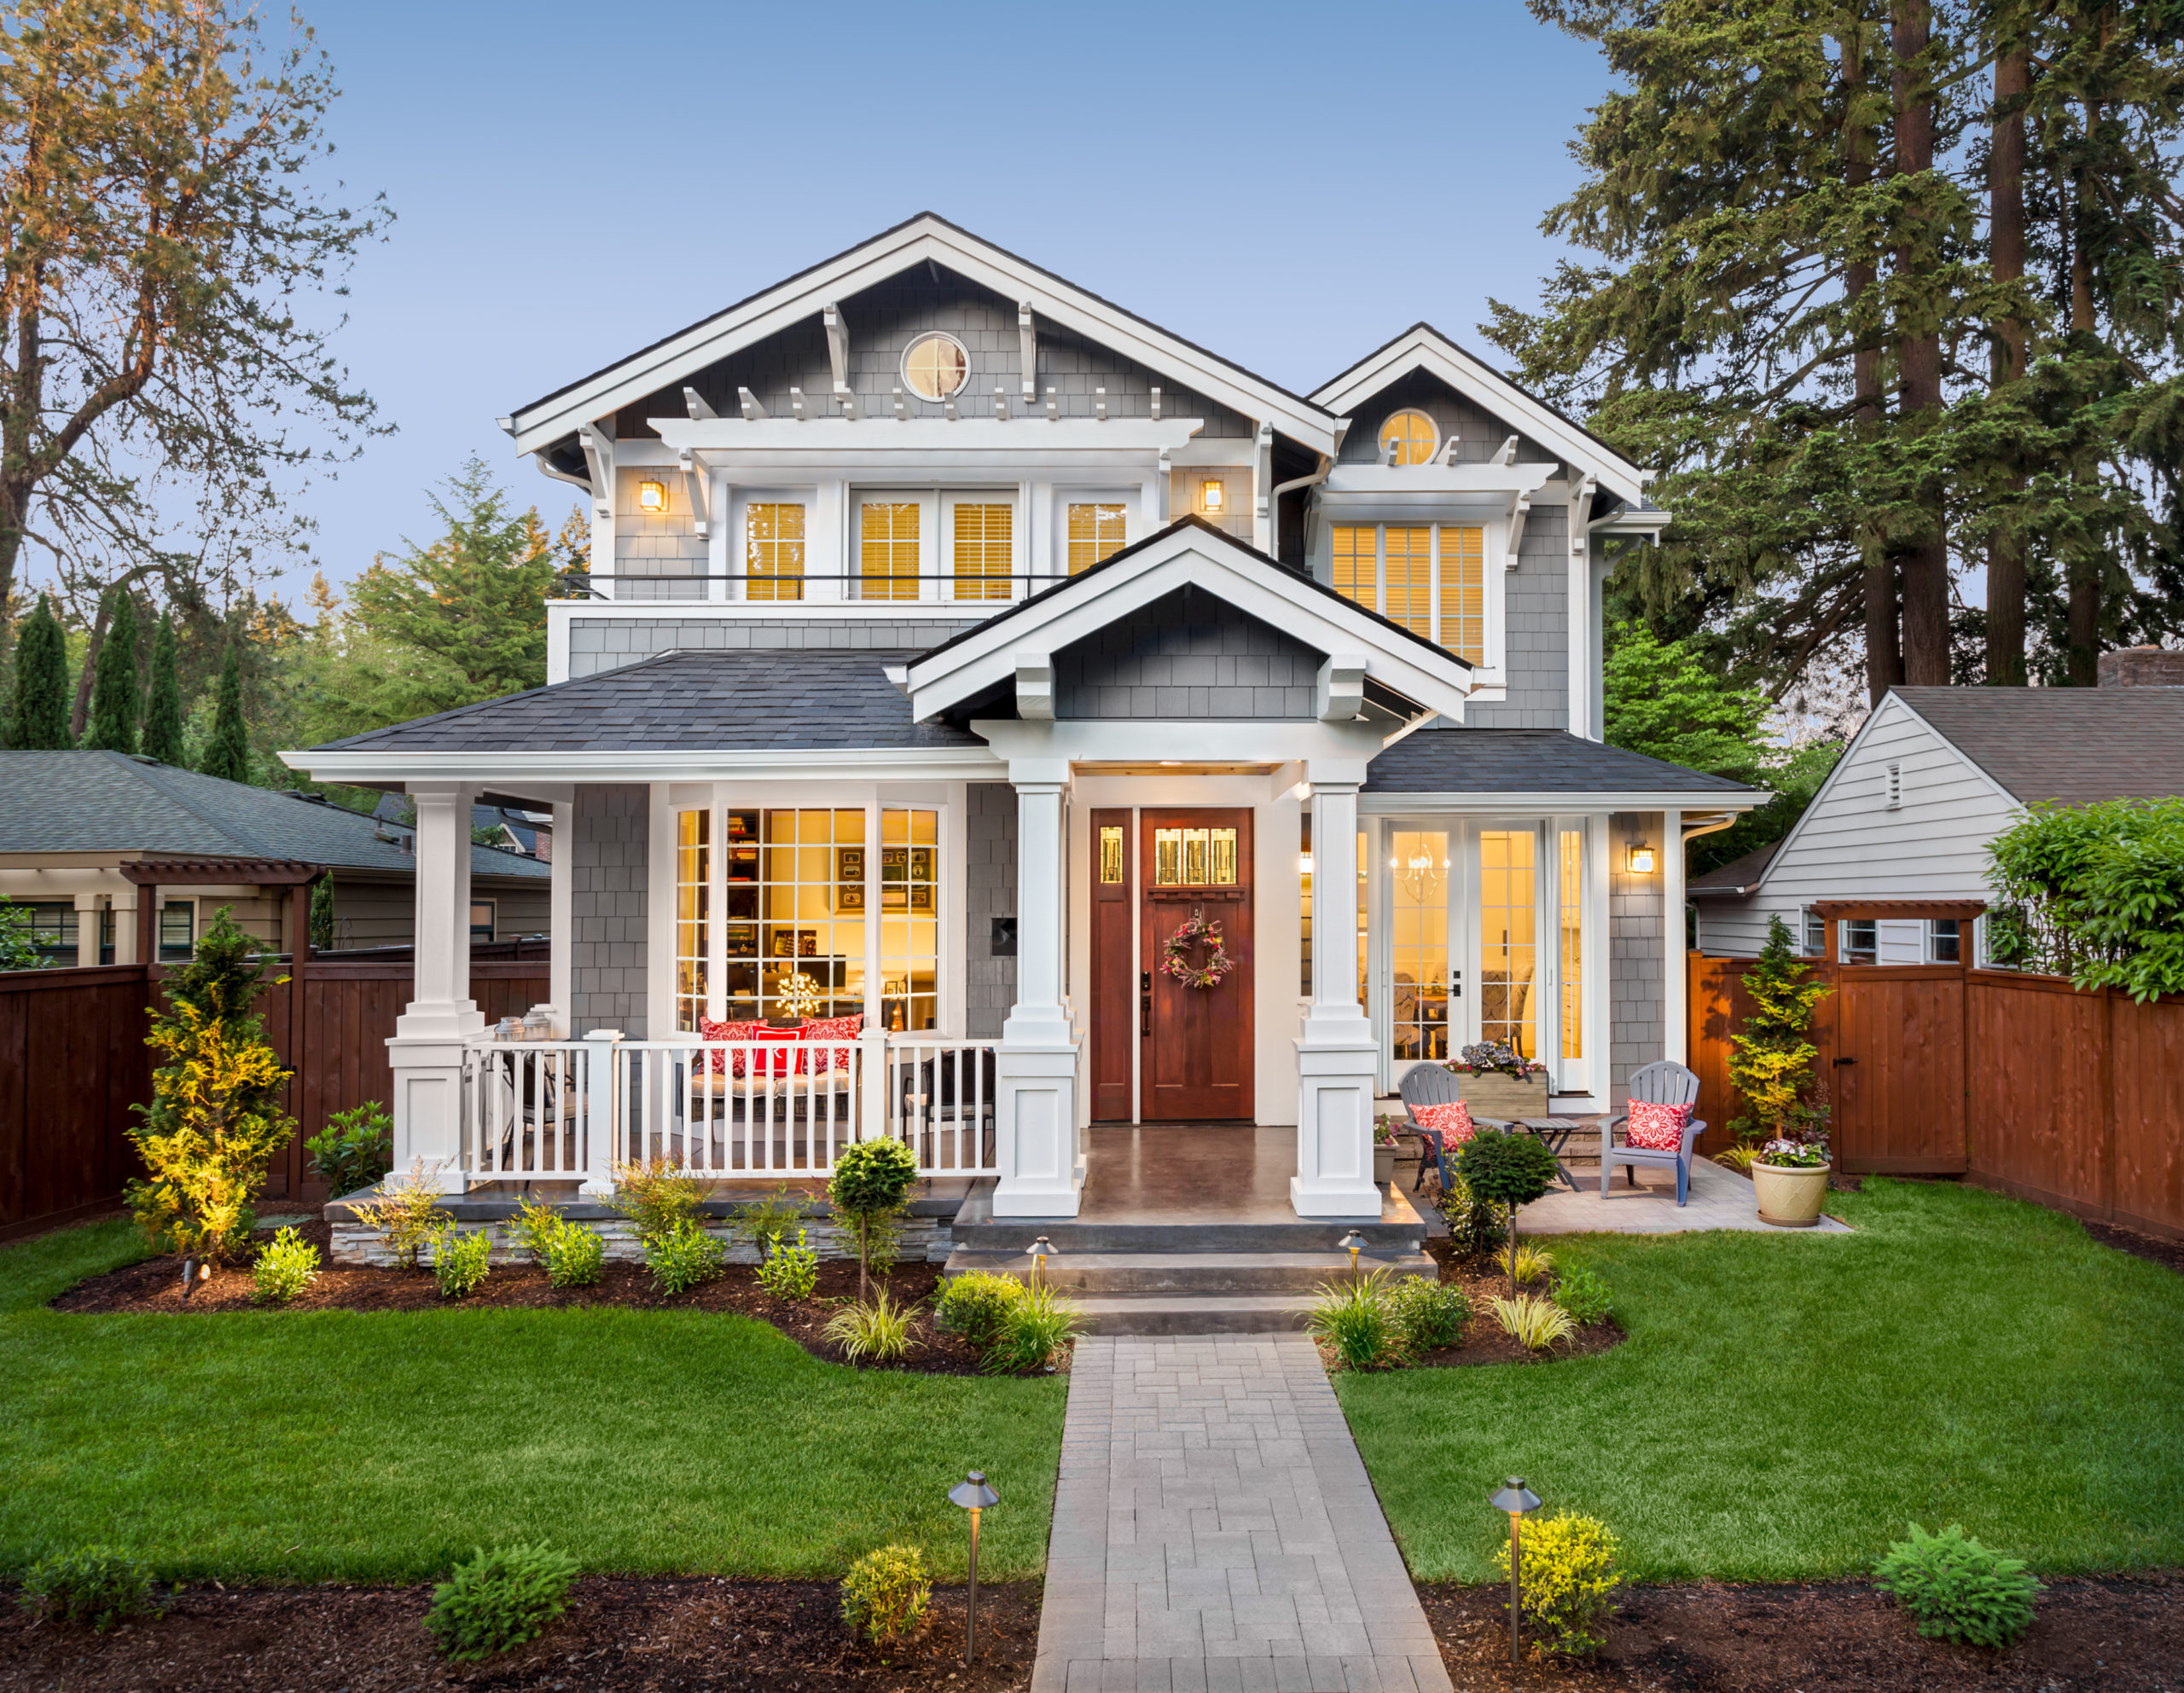 10 Spring Projects to Increase Property Value